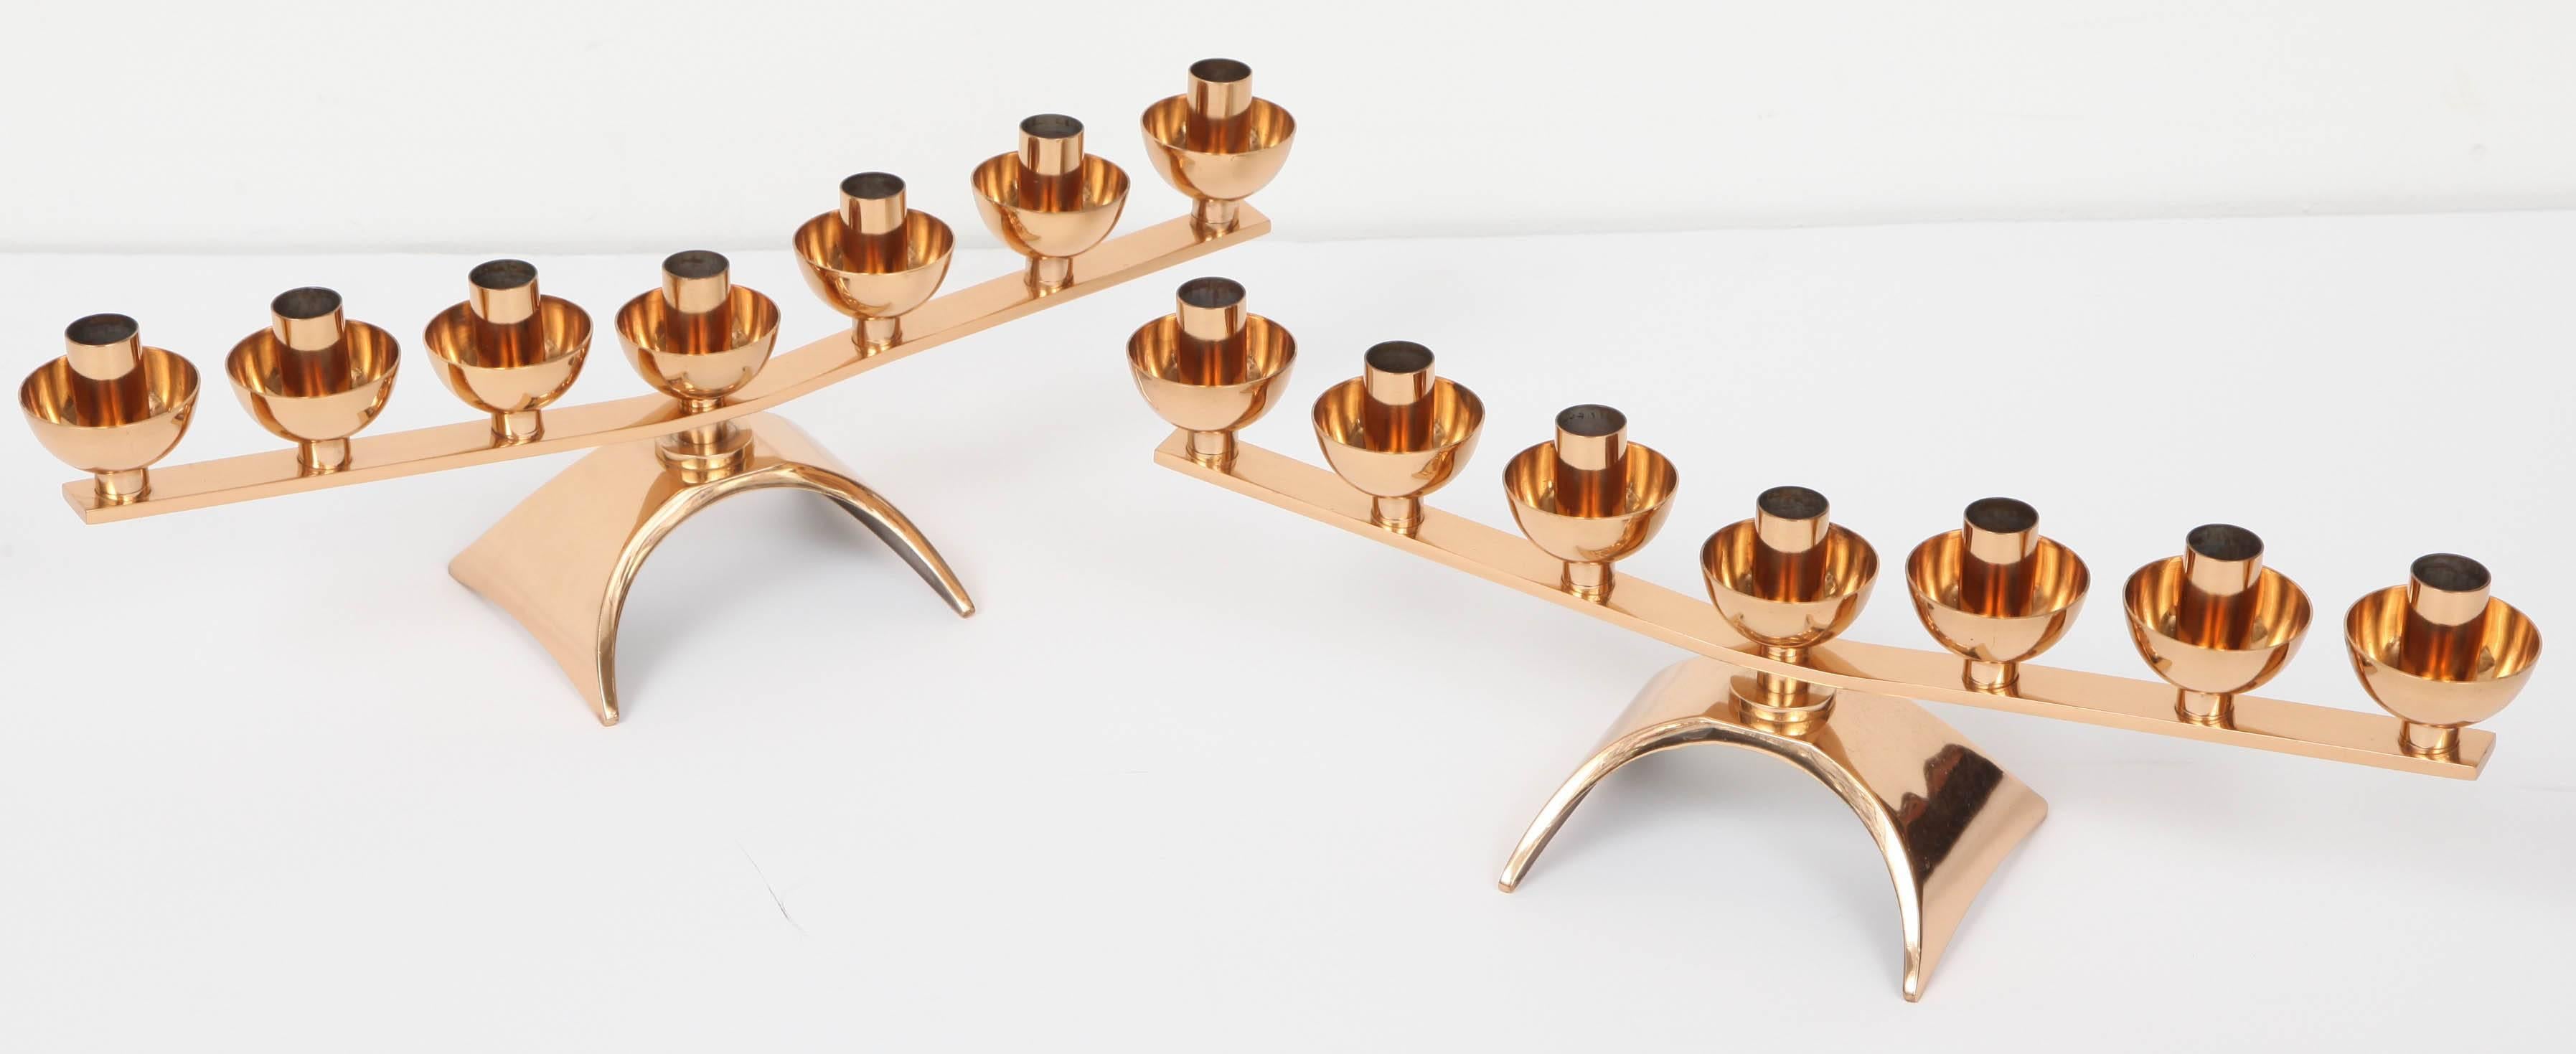 Pair of Brass Mid-Century Modern Candleholders, circa 1960 For Sale 6